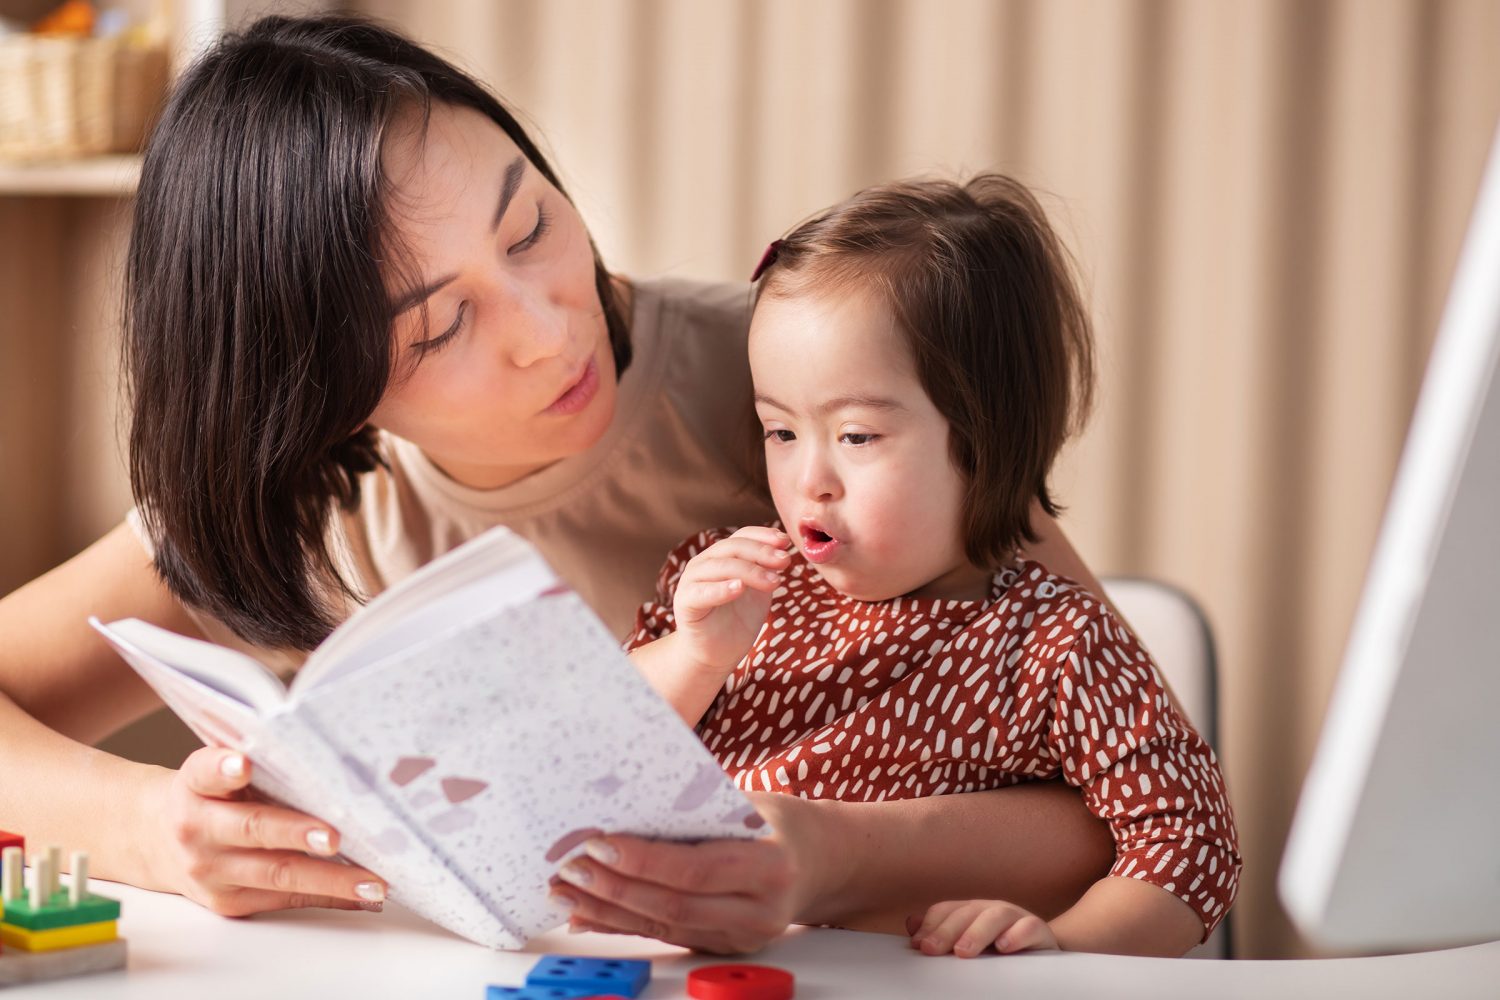 Asian mother reads book with her young daughter with Down syndrome